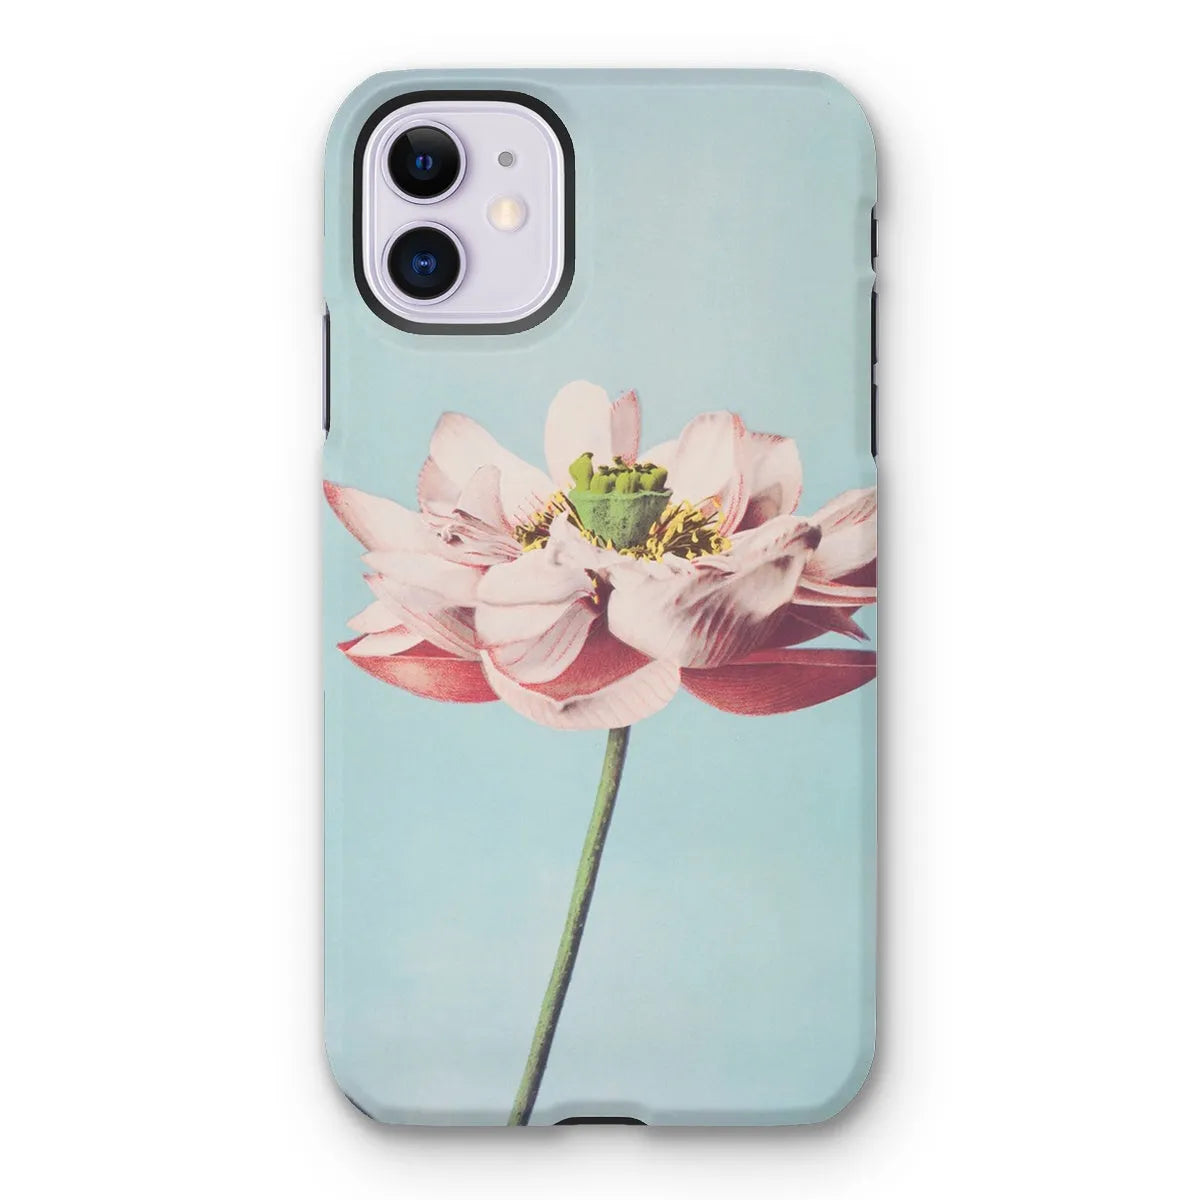 Pink Water Lily By Kazumasa Ogawa Art Phone Case - Iphone 11 / Matte - Mobile Phone Cases - Aesthetic Art